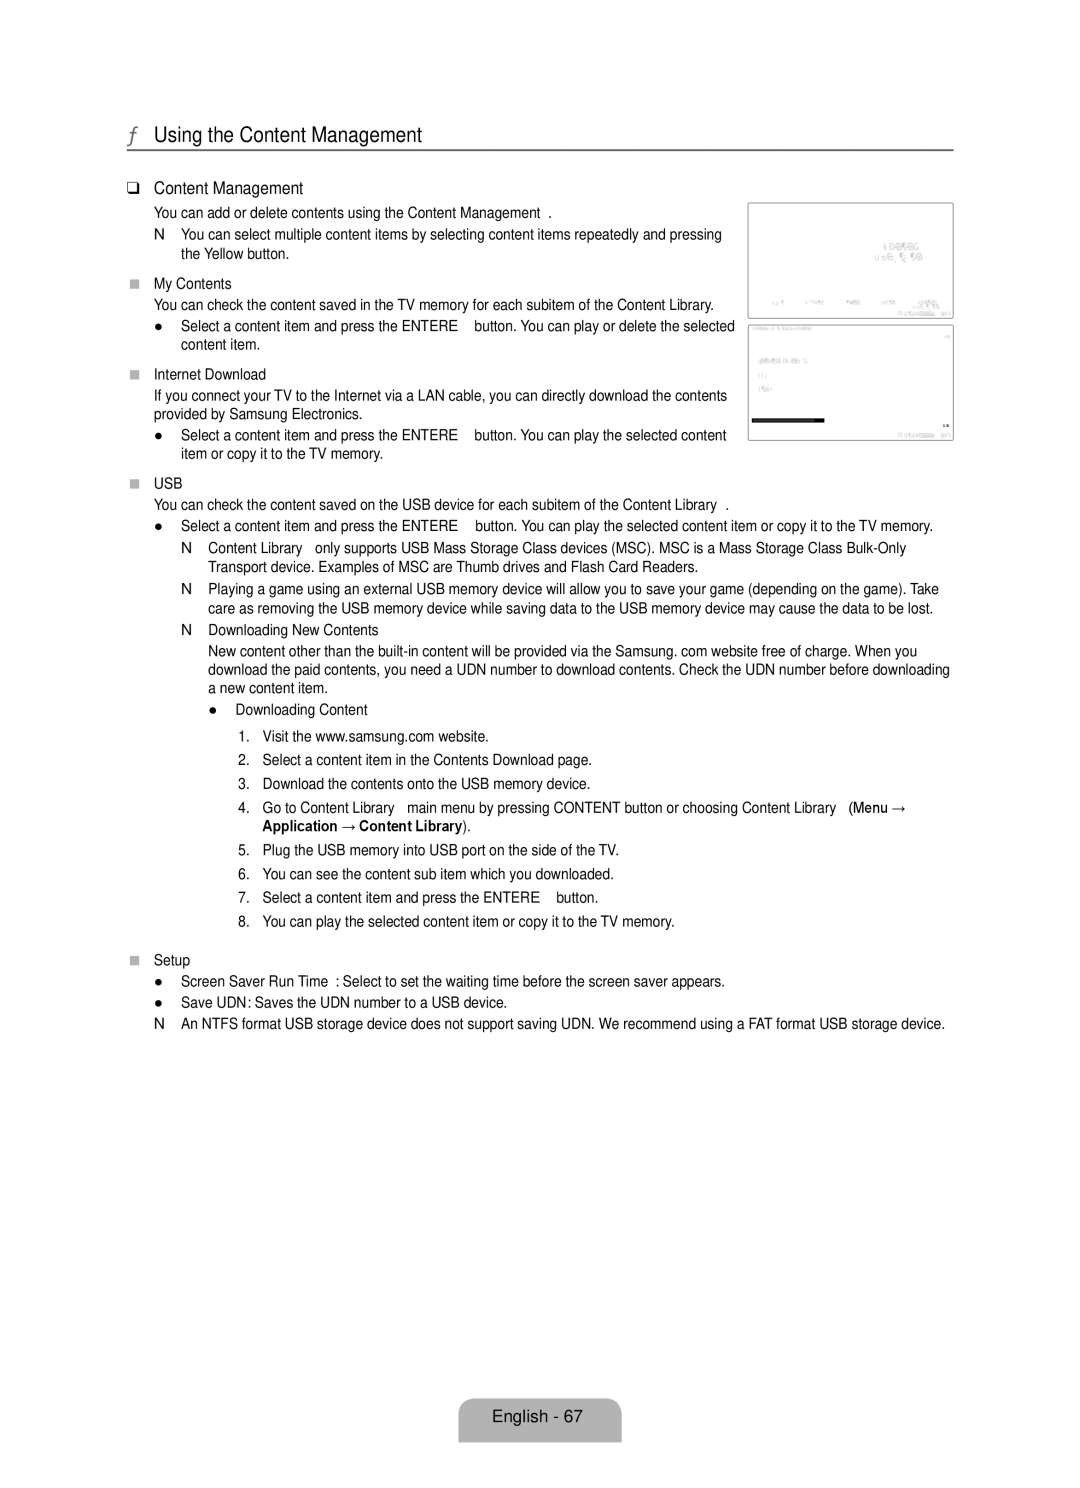 Samsung LN6B60 user manual Using the Content Management, My Contents, Setup 